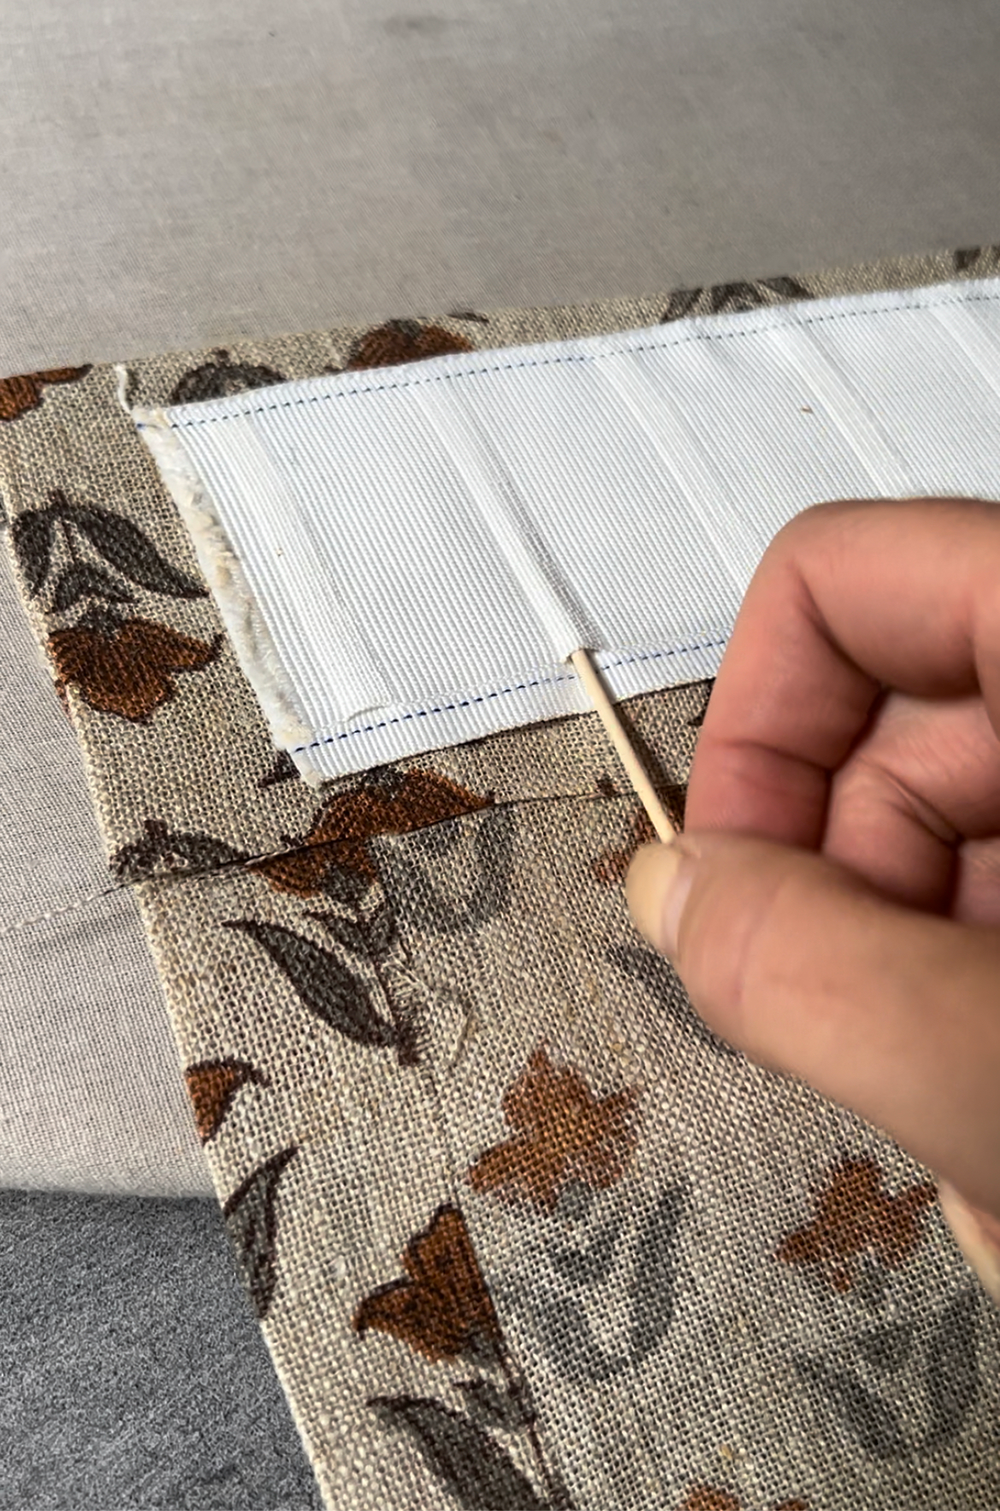 How to Make No Sew Pinch Pleat Curtains